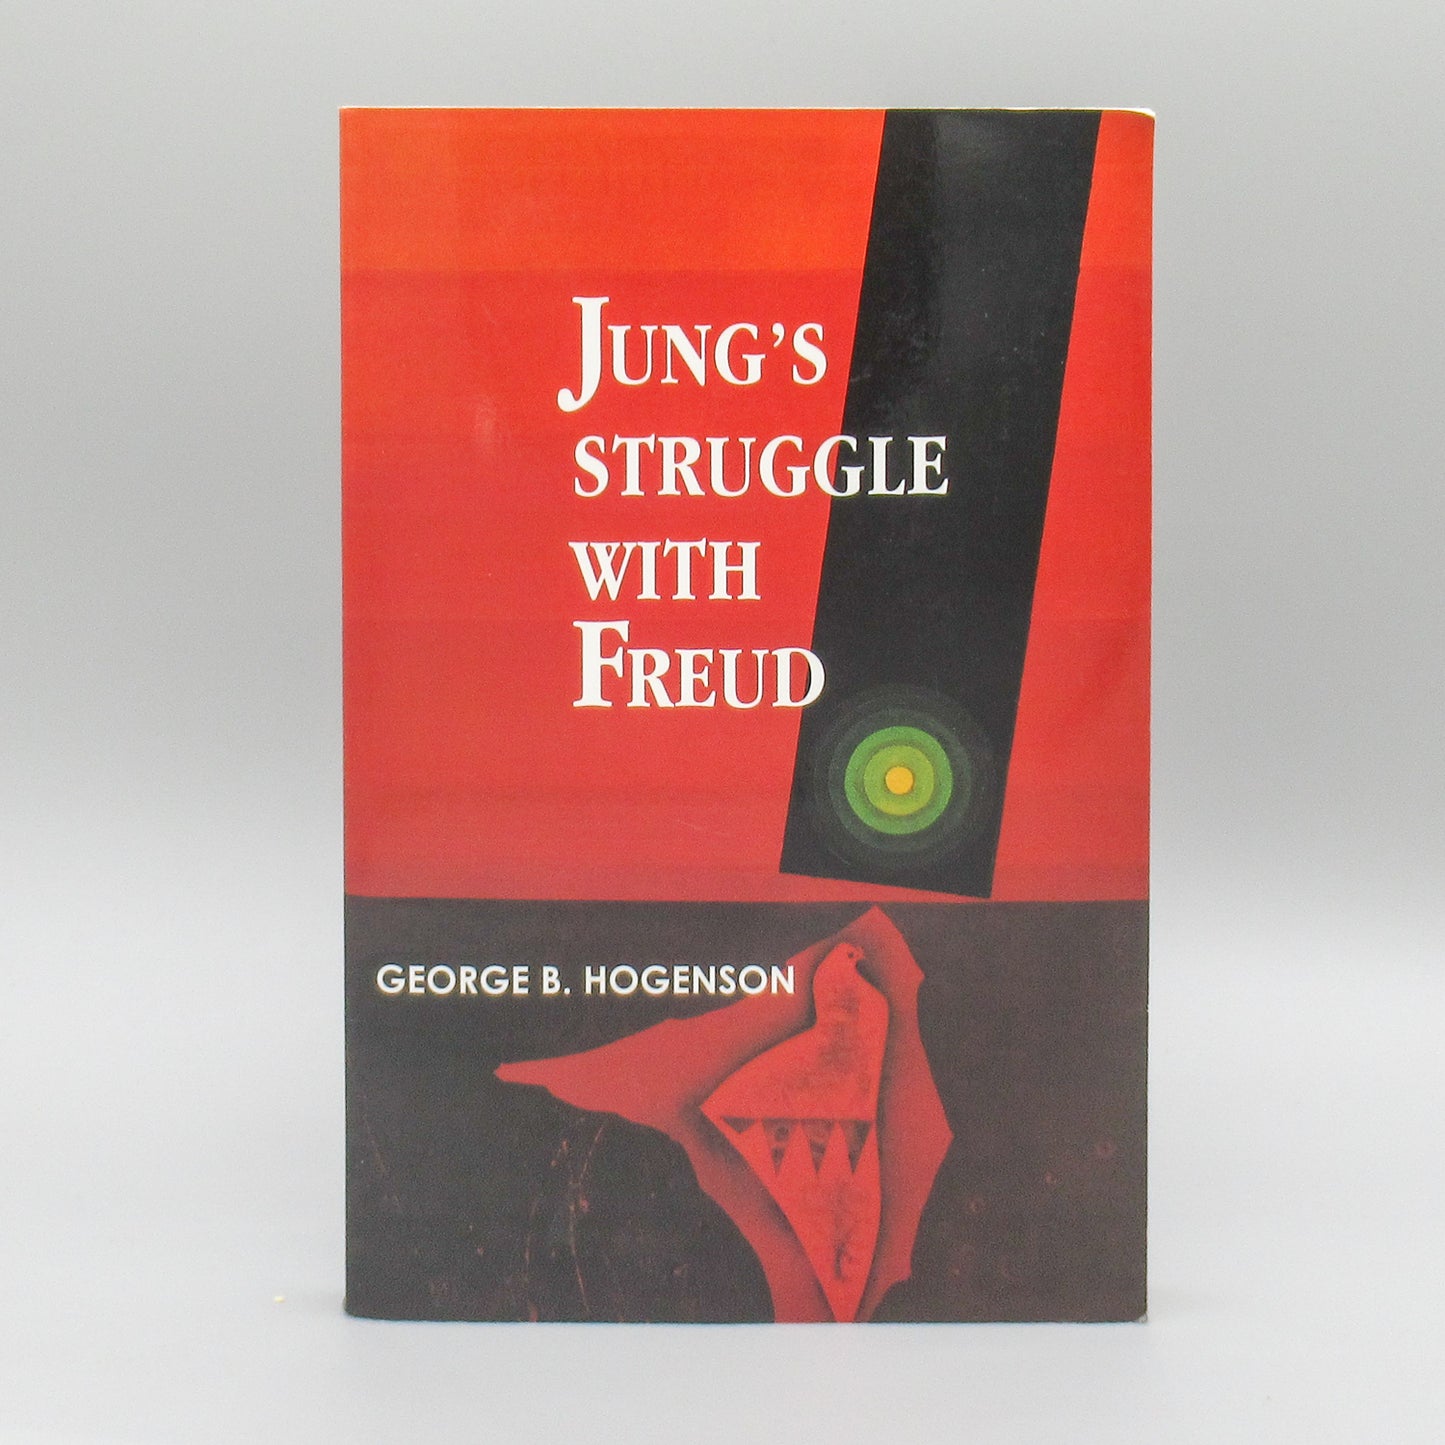 Jung's Struggle with Freud